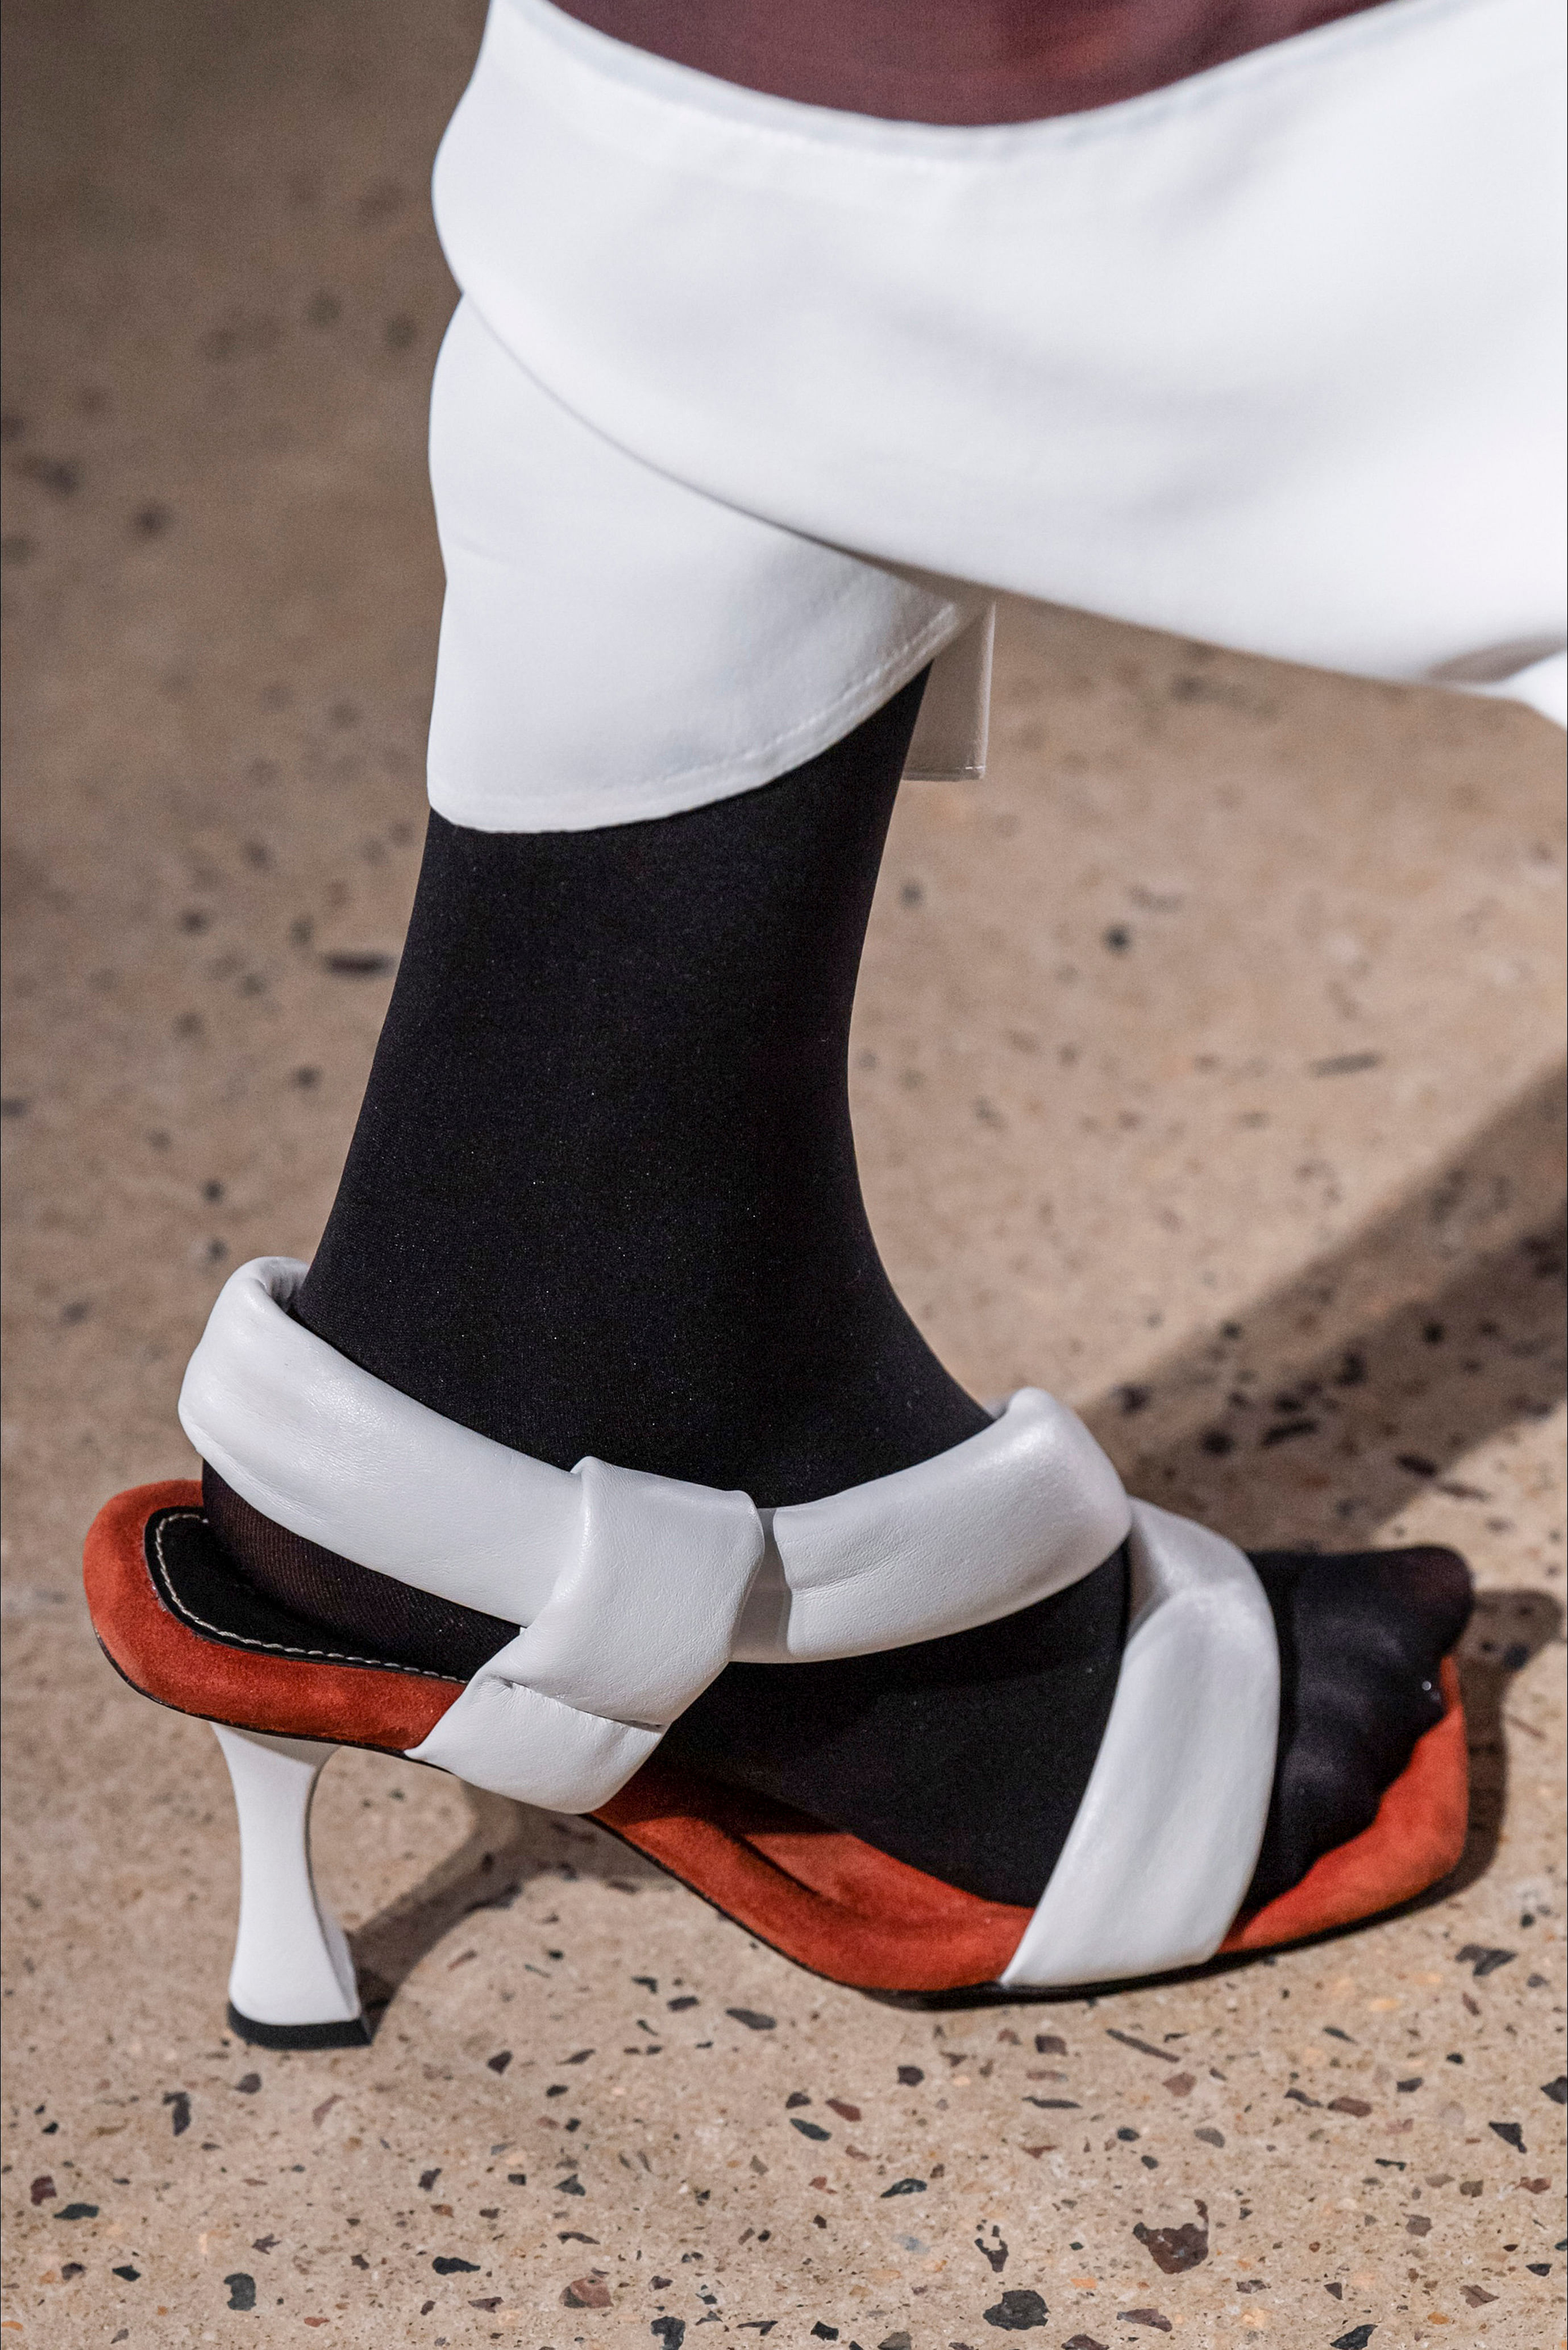 10 designer puffy strap sandals to get right NOW (cos' they're comfy ...